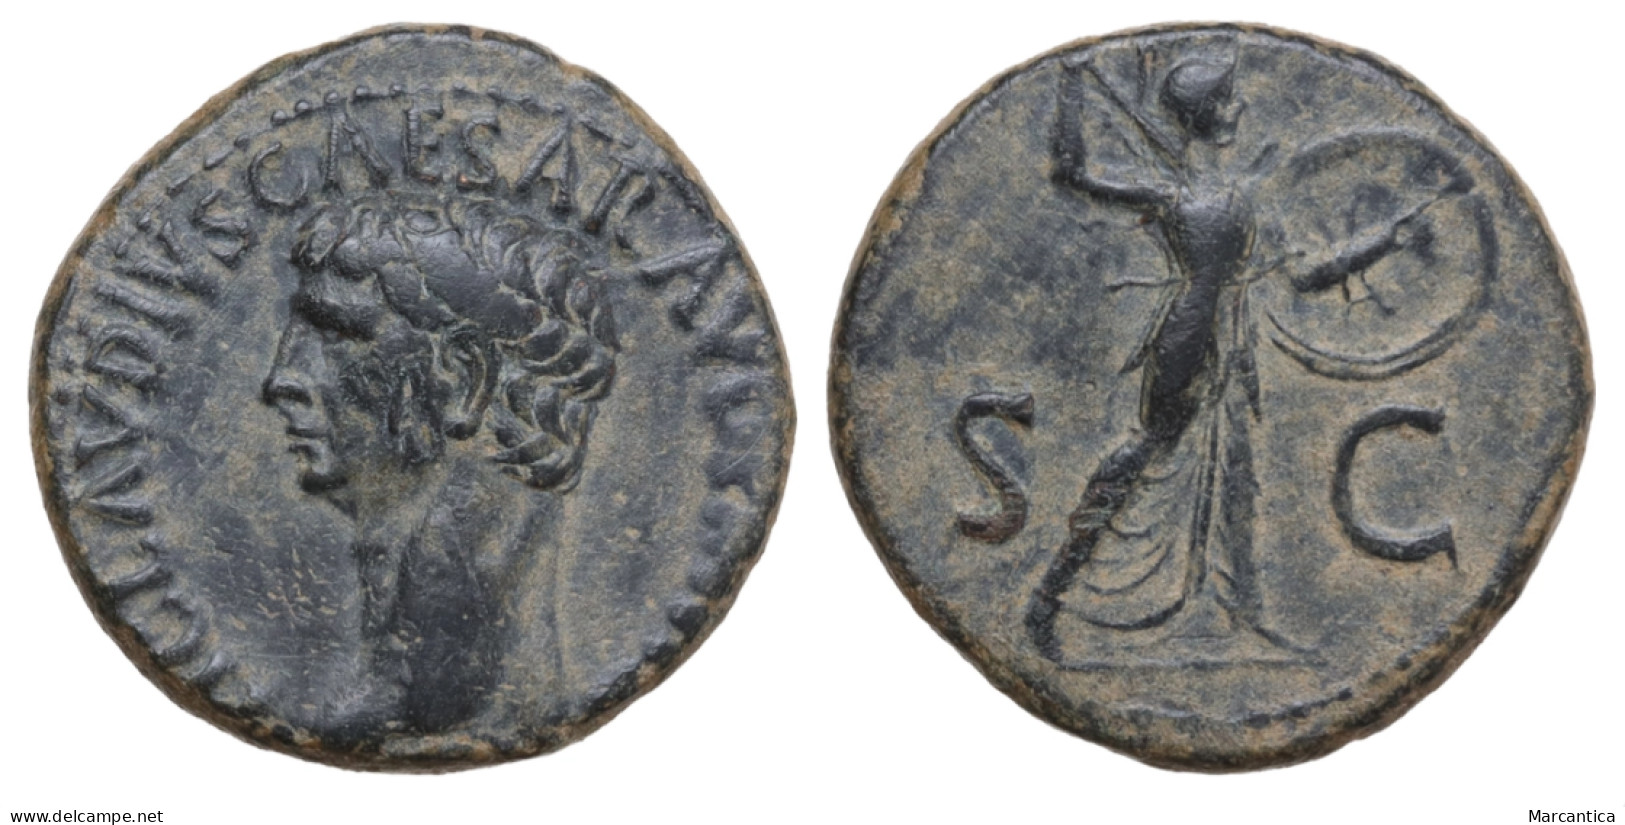 CCG Certified! CLAUDIUS (41-54). As. Rome. - The Julio-Claudians (27 BC To 69 AD)